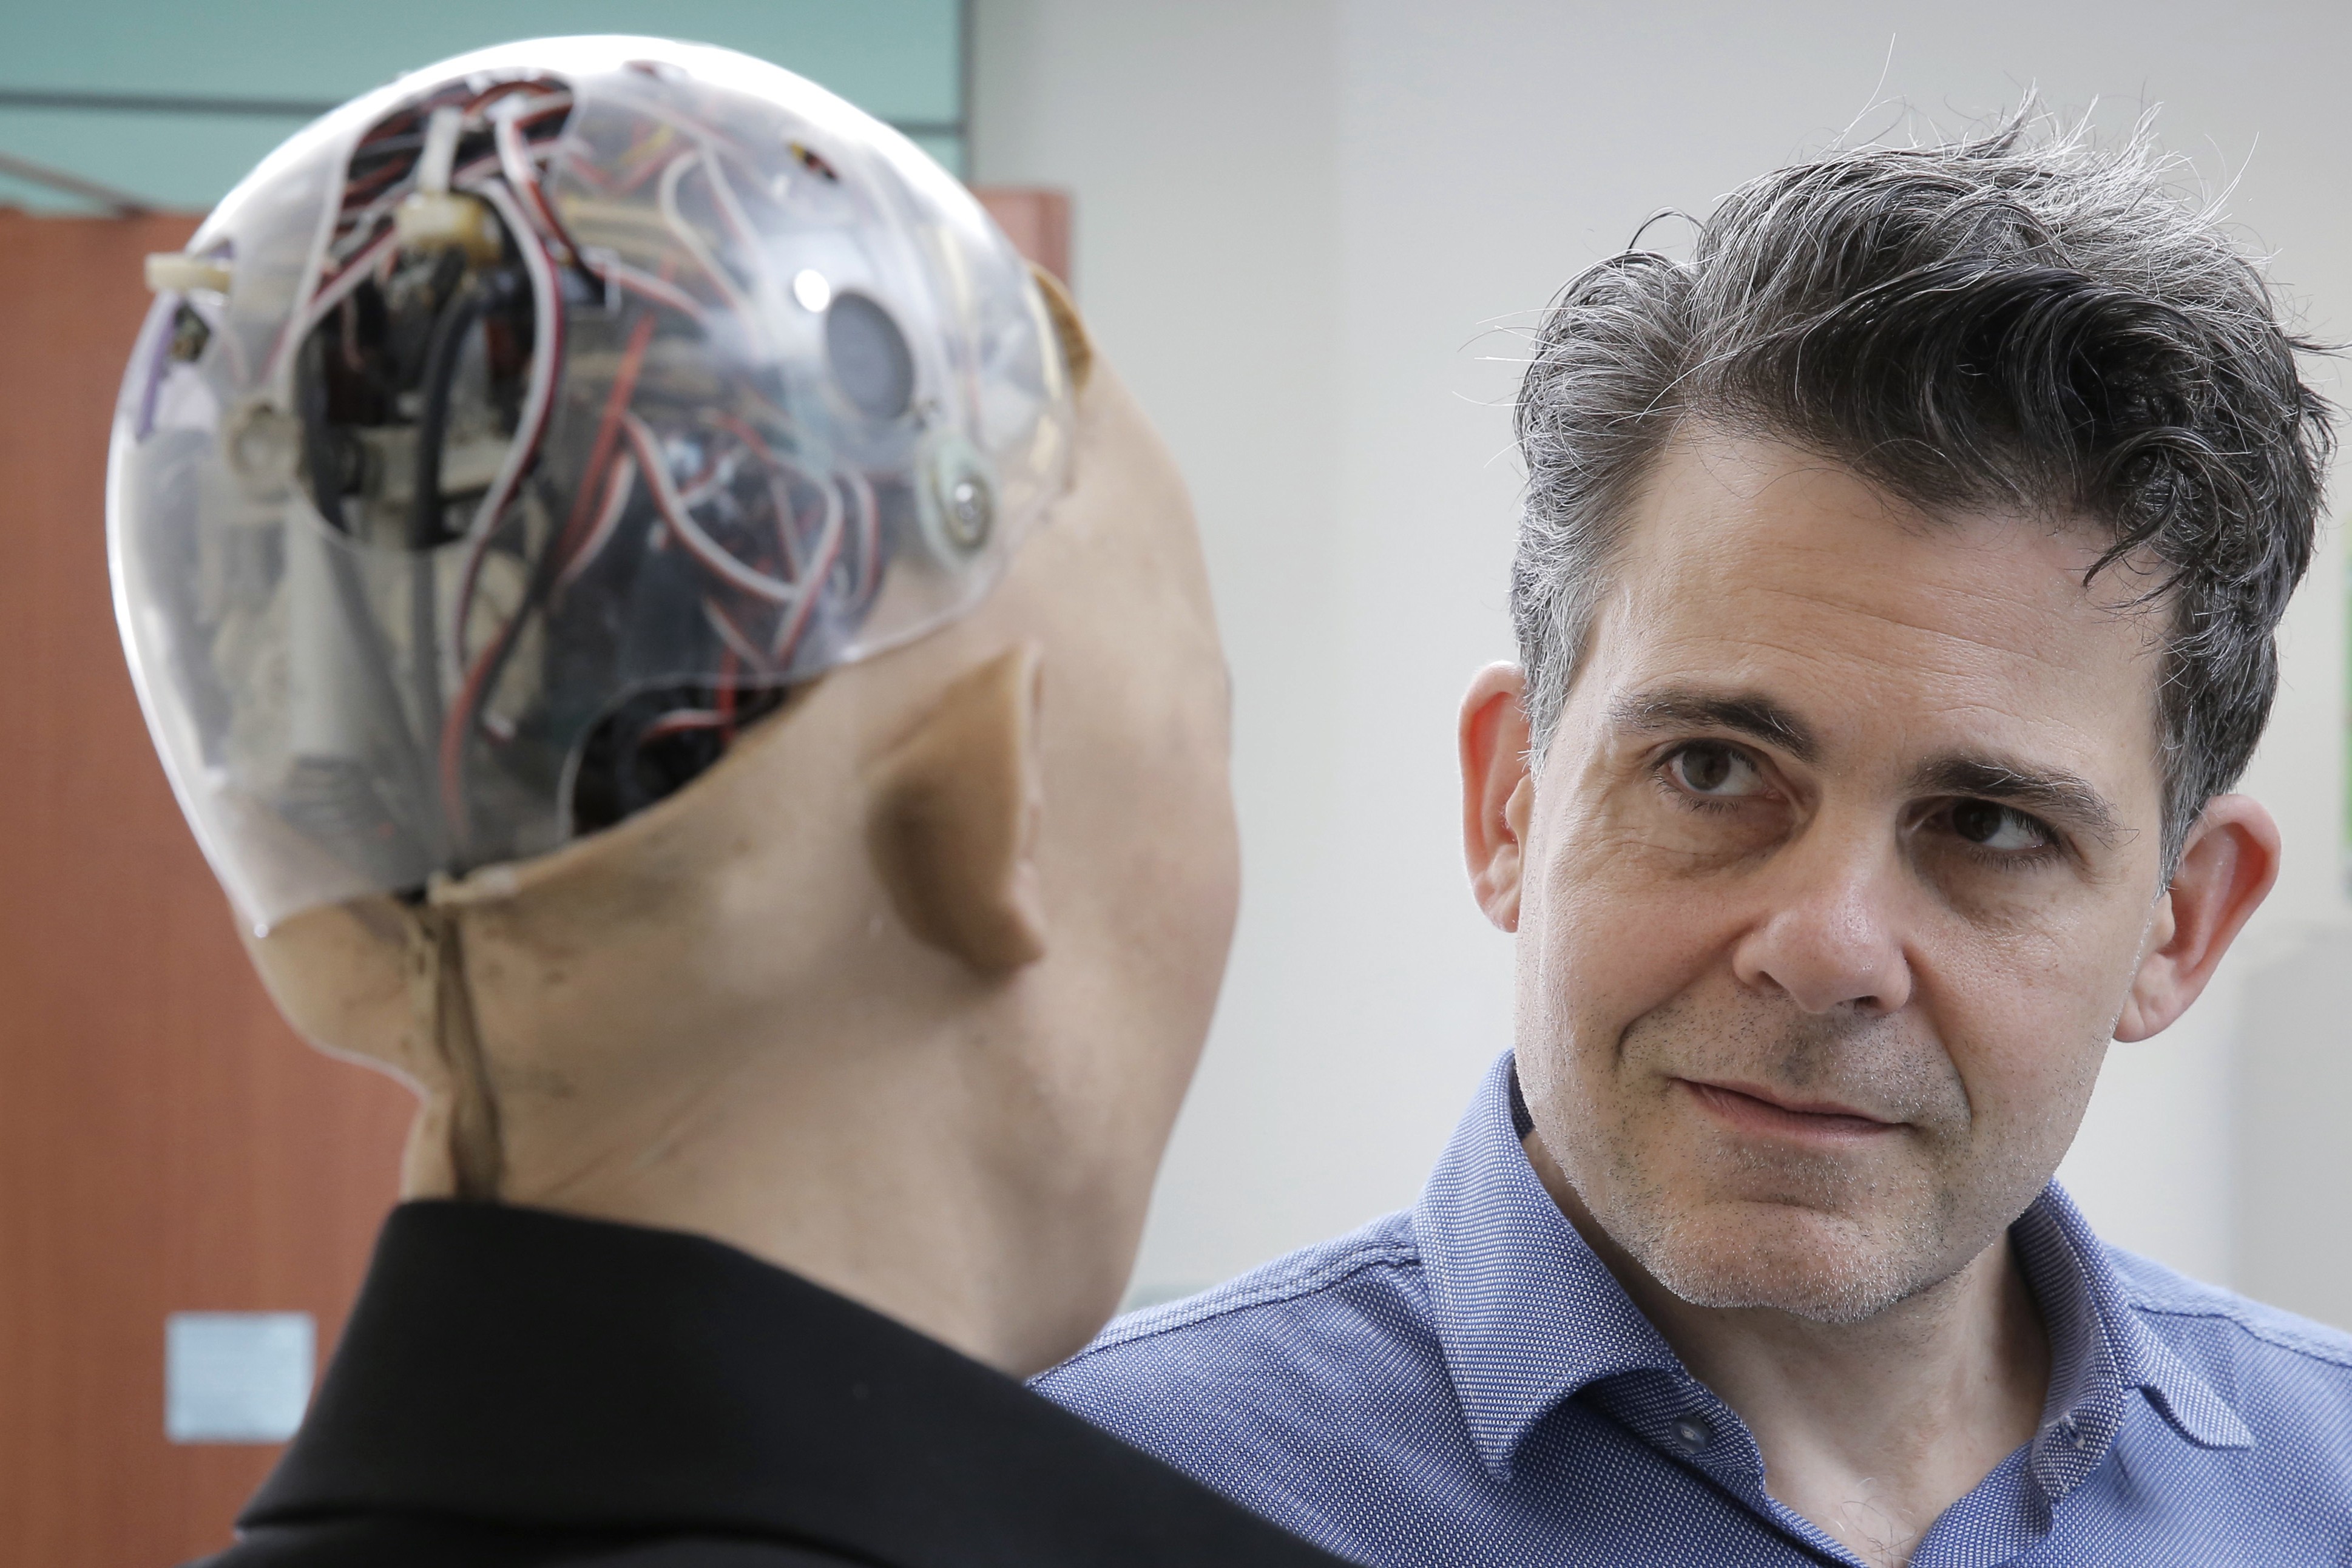 David Hanson, the founder of Hanson Robotics, talks with his company's flagship robot Sophia powered by artificial intelligence in Hong Kong. Hanson envisions a future in which AI-powered robots evolve to become “super-intelligent genius machines” that can help solve mankind’s most challenging problems. Photo: AP